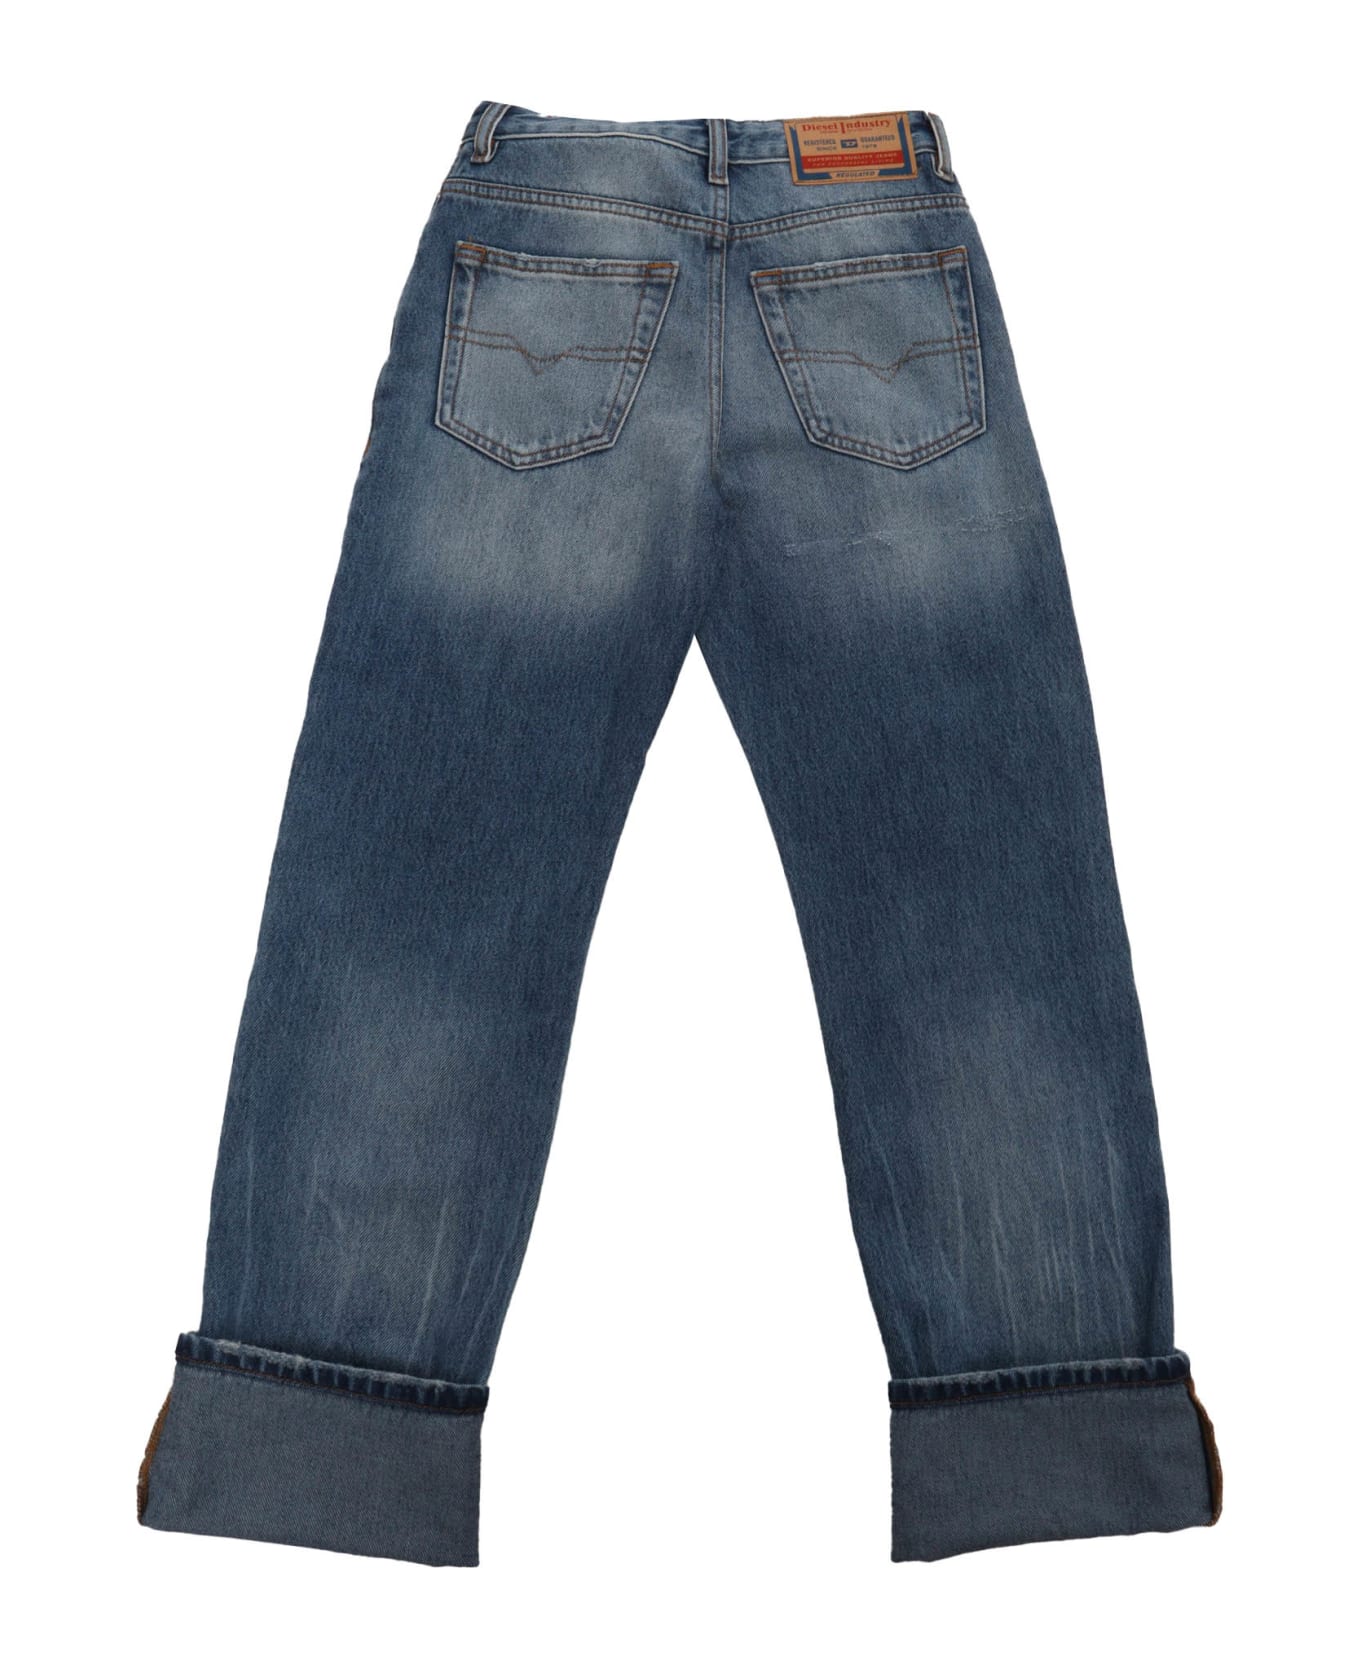 Diesel Blue Jeans With Cuffs - BLUE ボトムス